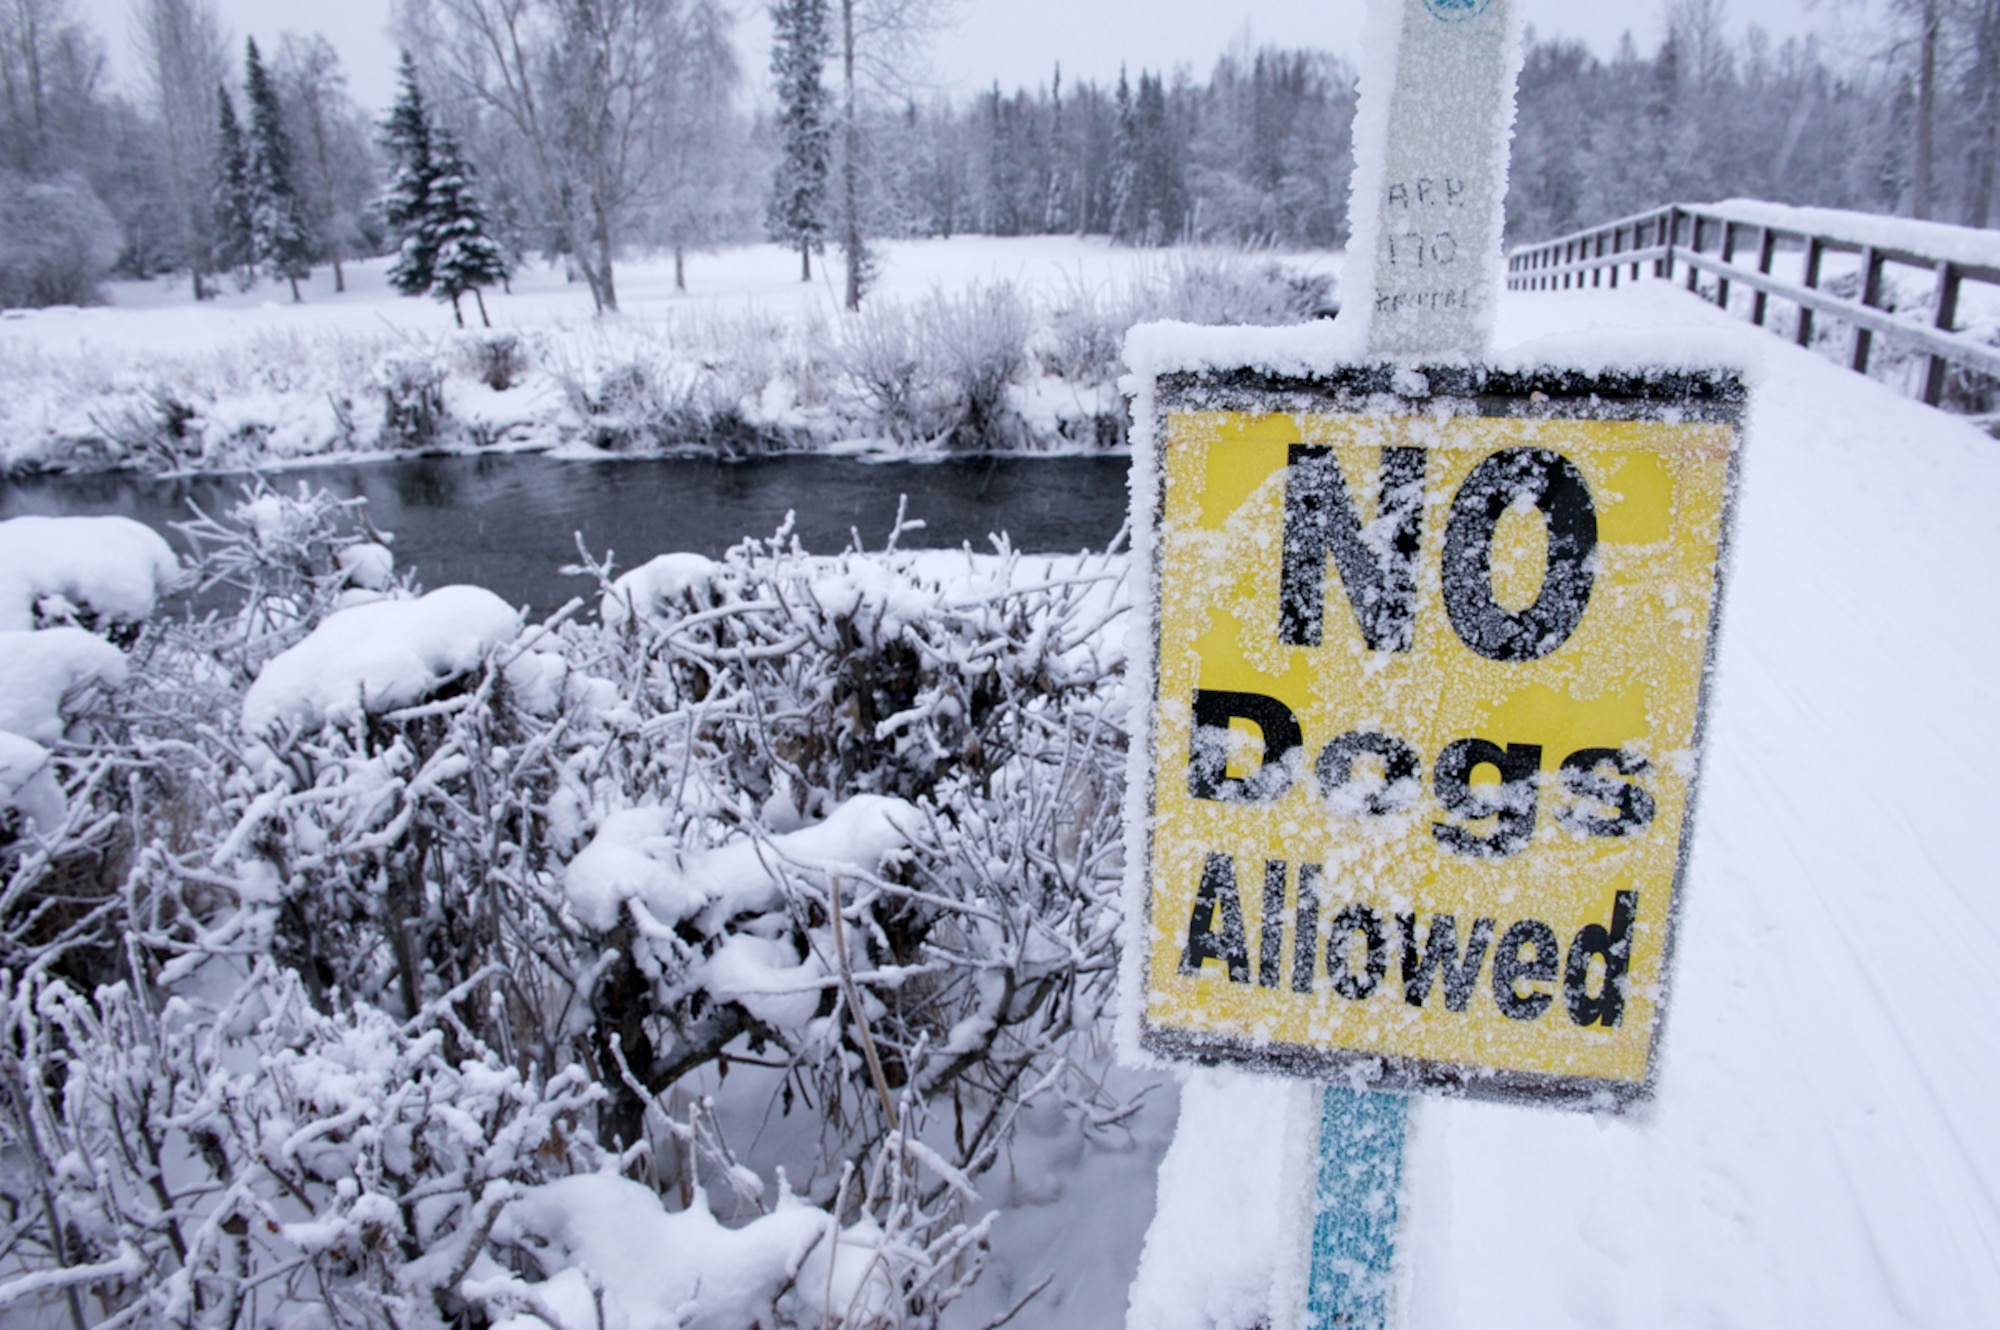 A sign at the Eagleglen Golf Course cross-country ski trail ensures no four-legged animals posthole the groomed trails. The course is host to several beautiful landscape views. (Photos by David Bedard/JBER PAO)